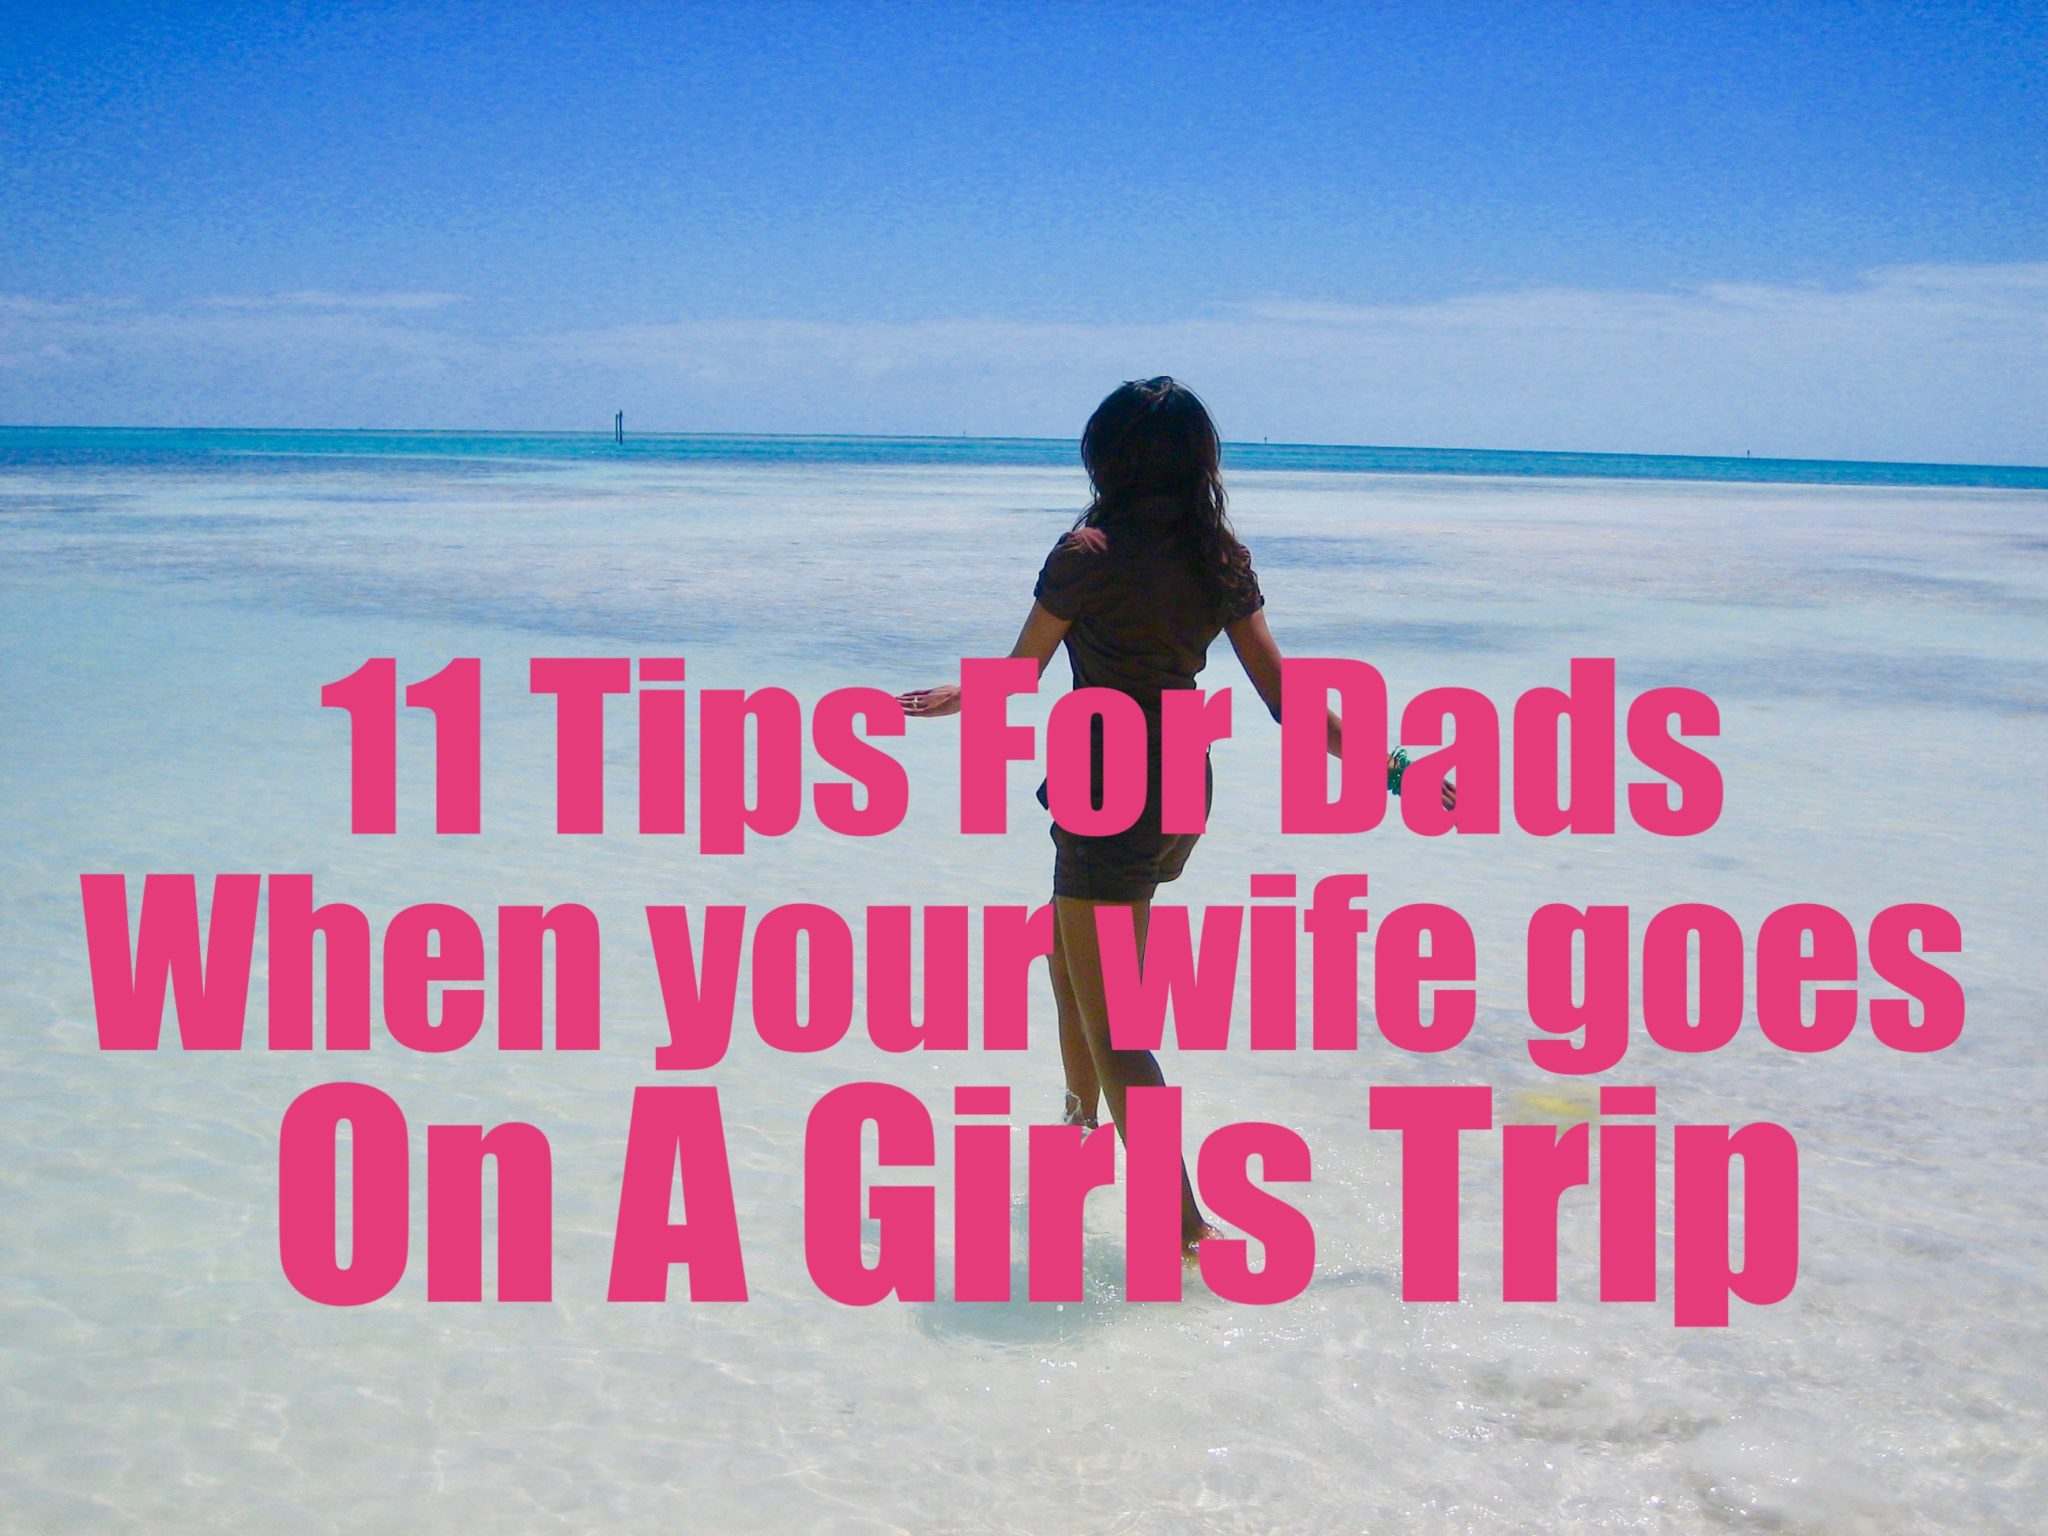 11 Tips For Dads when your wife goes on a girls trip